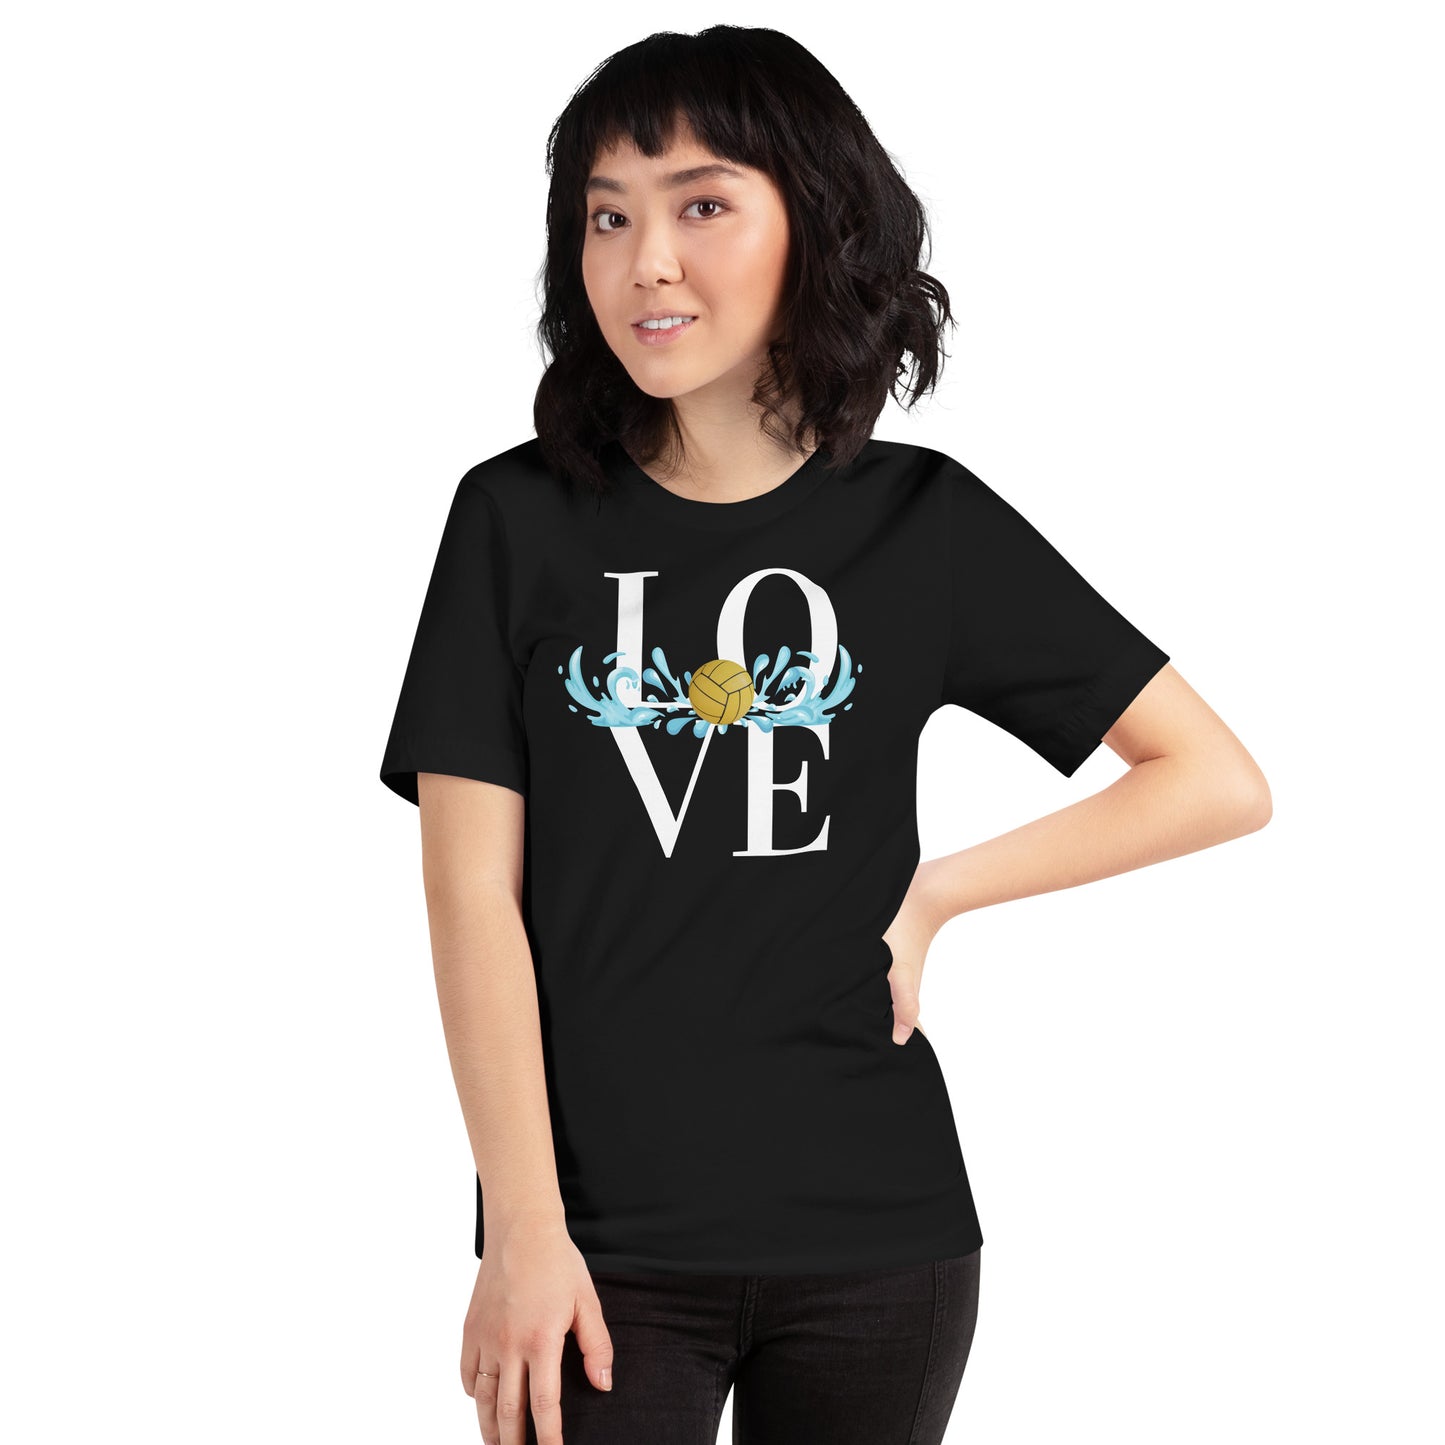 LOVE Waterpolo with a Big Splash - Unisex Soft T-shirt - Bella Canvas 3001